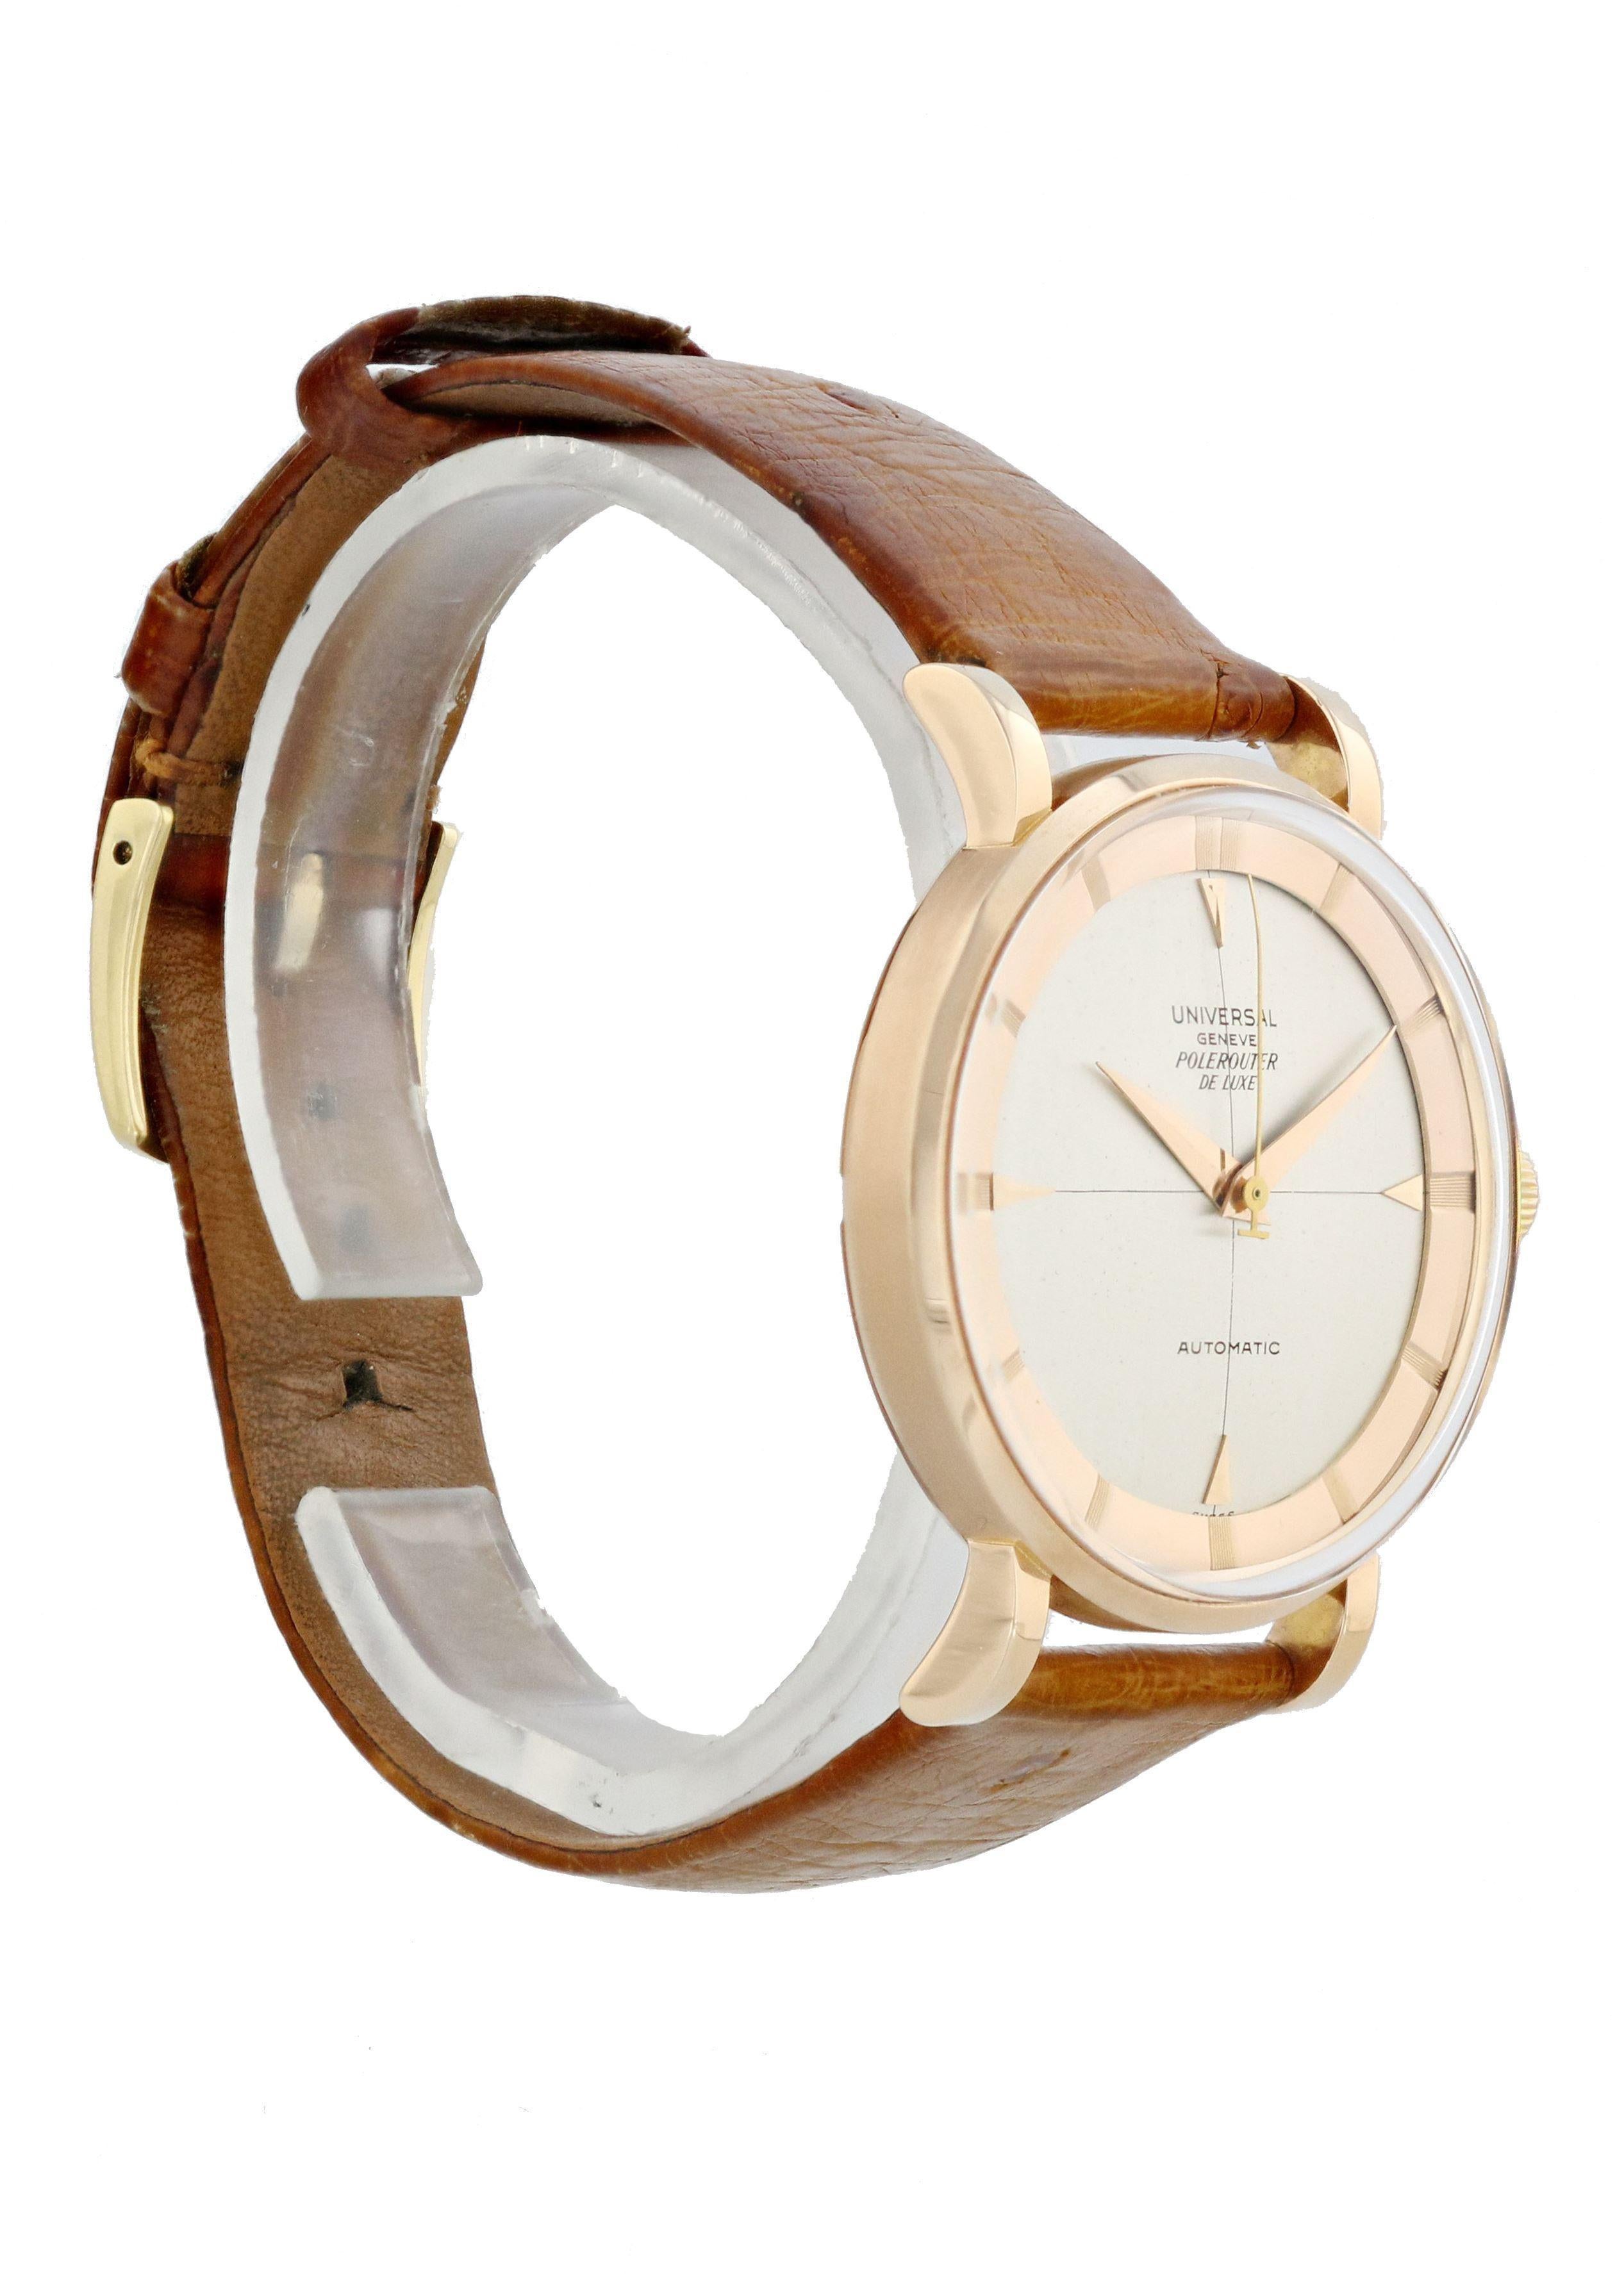 Universal Geneve Polerouter 1761323 Men Watch. 
35mm 18k Rose Gold case. 
Rose Gold None bezel. 
Rose Gold dial and hands. 
Tiffany & Co Light brown Leather Ostrich Leather with Tiffany & Co Buckle. 
Acrylic Crystal, rose gold case back.  
Automatic